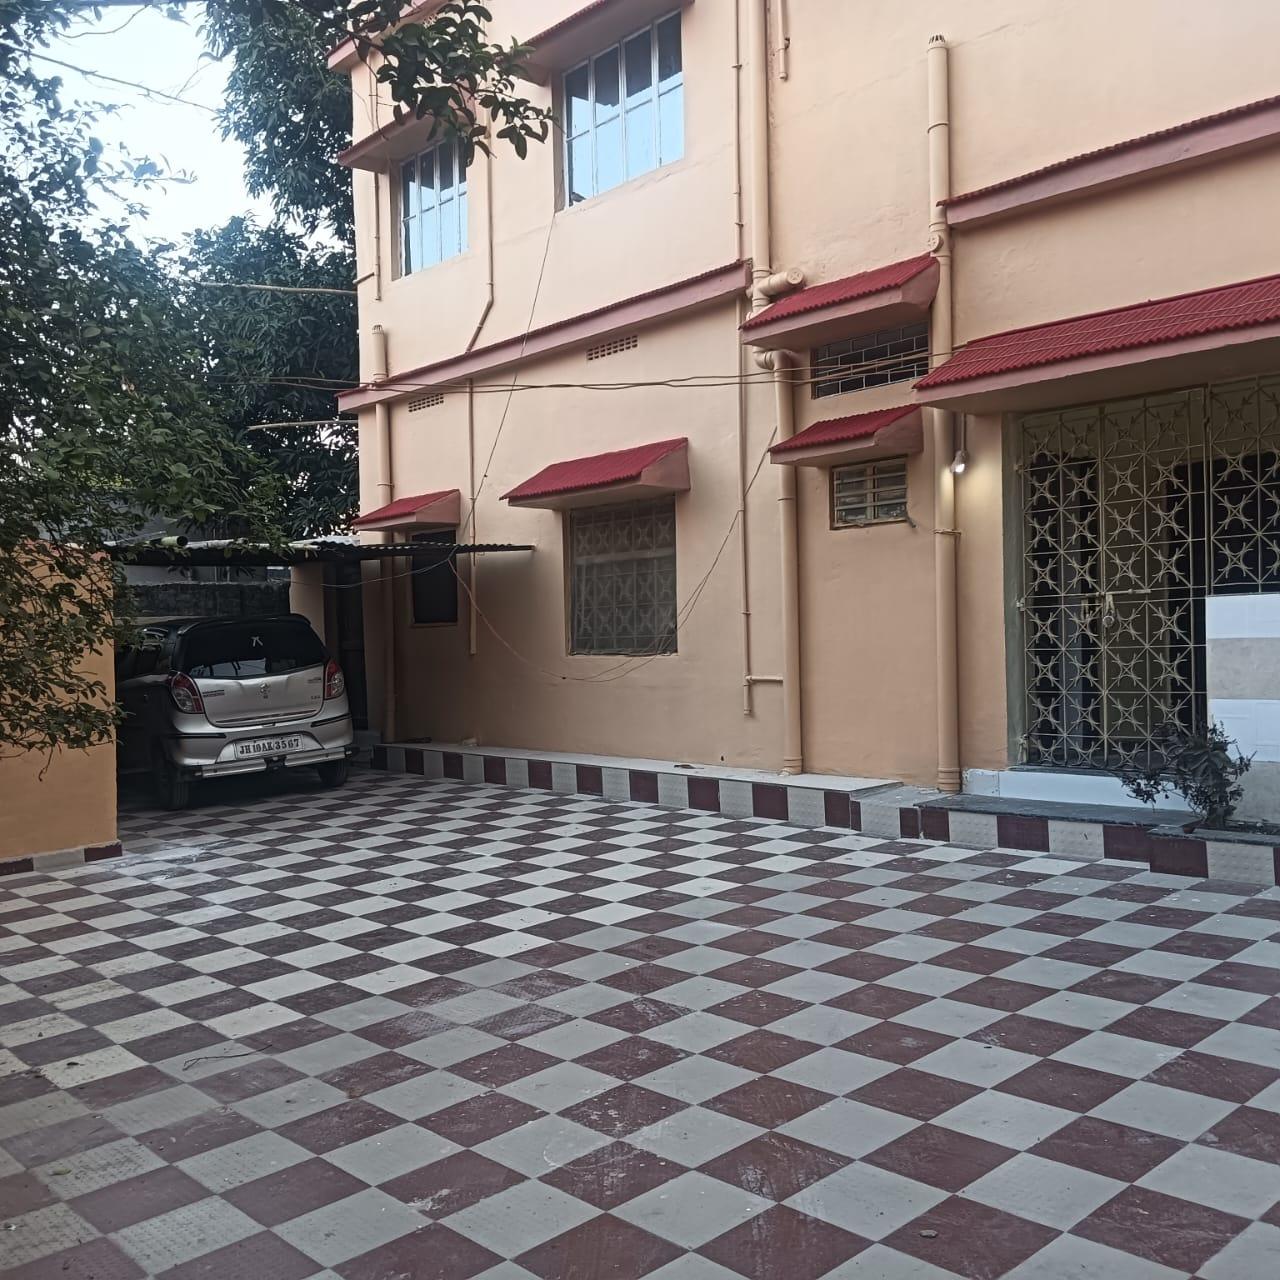 3 Bed/ 2 Bath Rent House/ Bungalow/ Villa; 1,800 sq. ft. carpet area, UnFurnished for rent @New barganda professor's colony womens college road